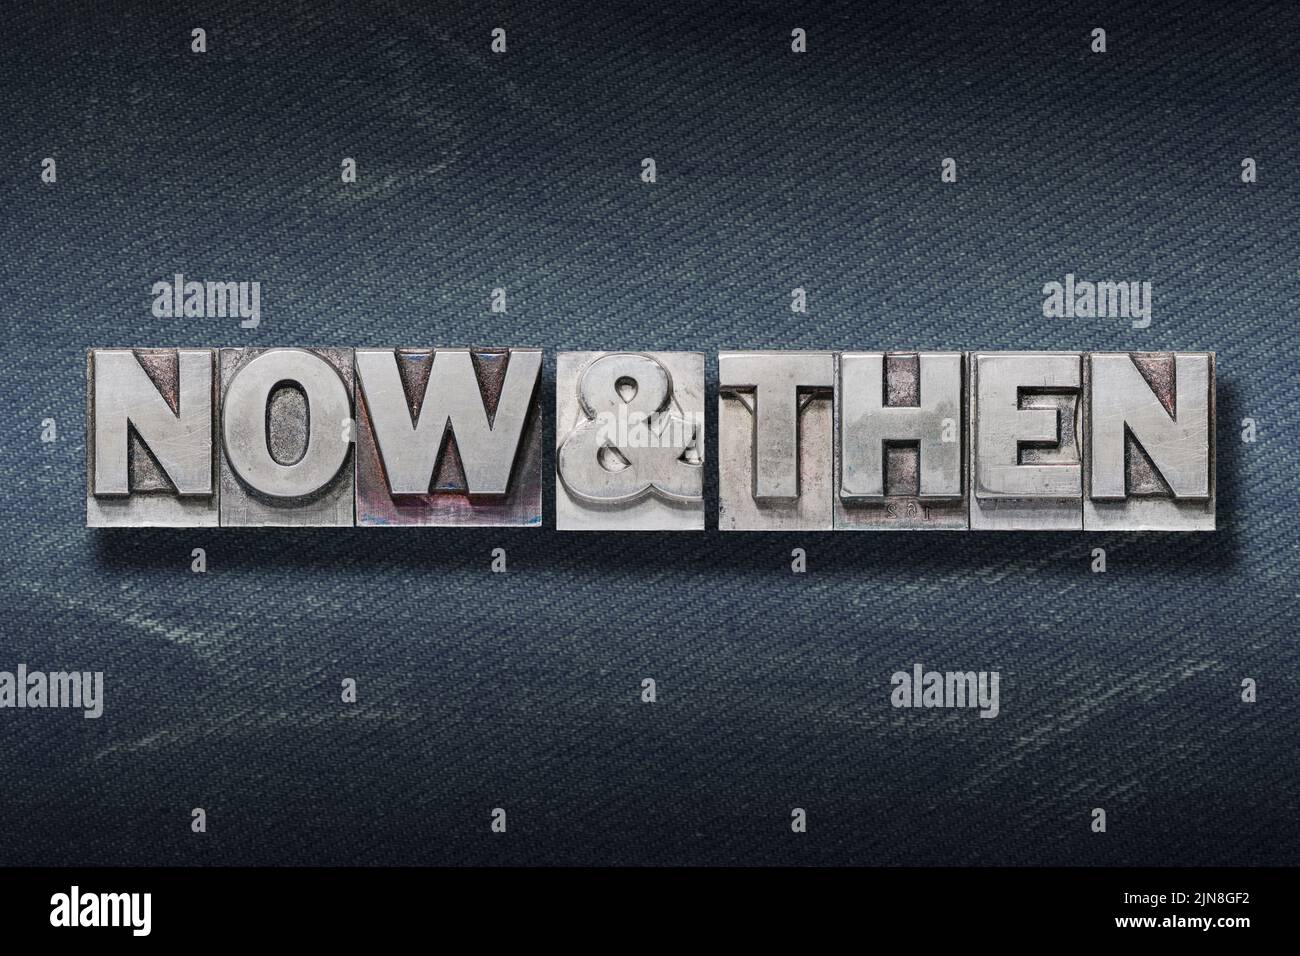 now and then phrase made from metallic letterpress on dark jeans background Stock Photo